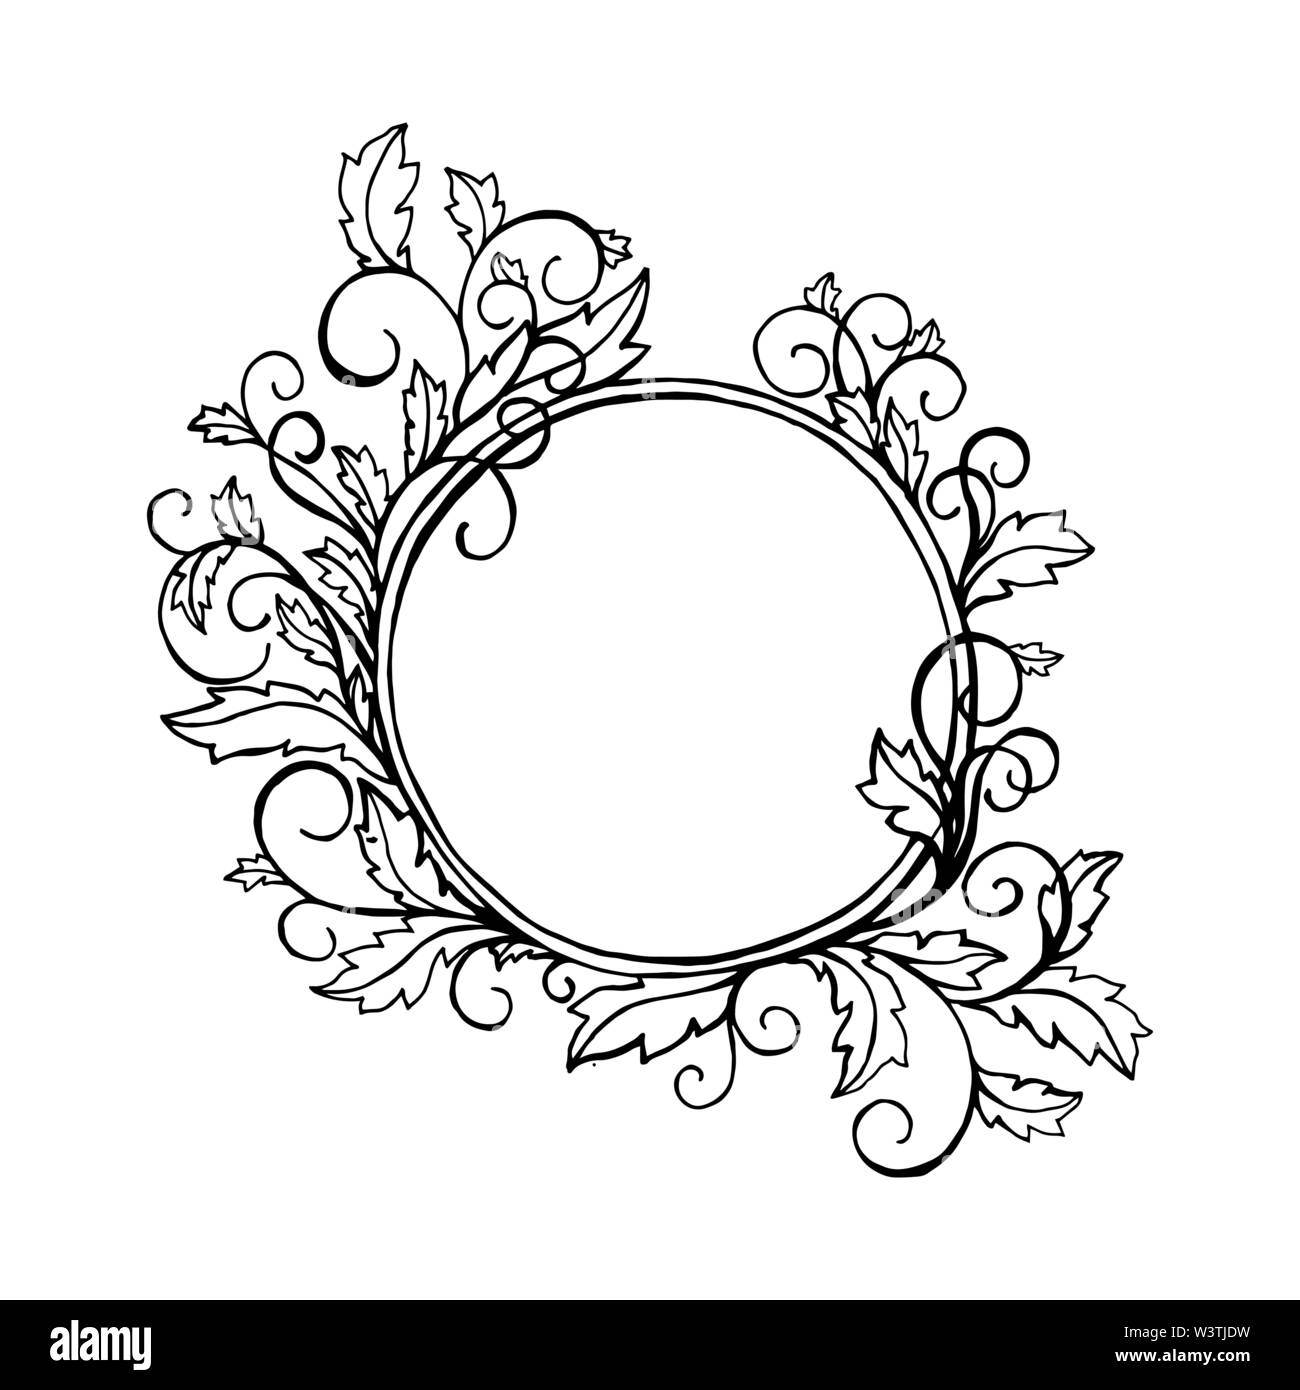 Round frame with curly ornamental border. For picture or photo. Black element, coloring book page cover design. Vector isolated illustration Stock Vector